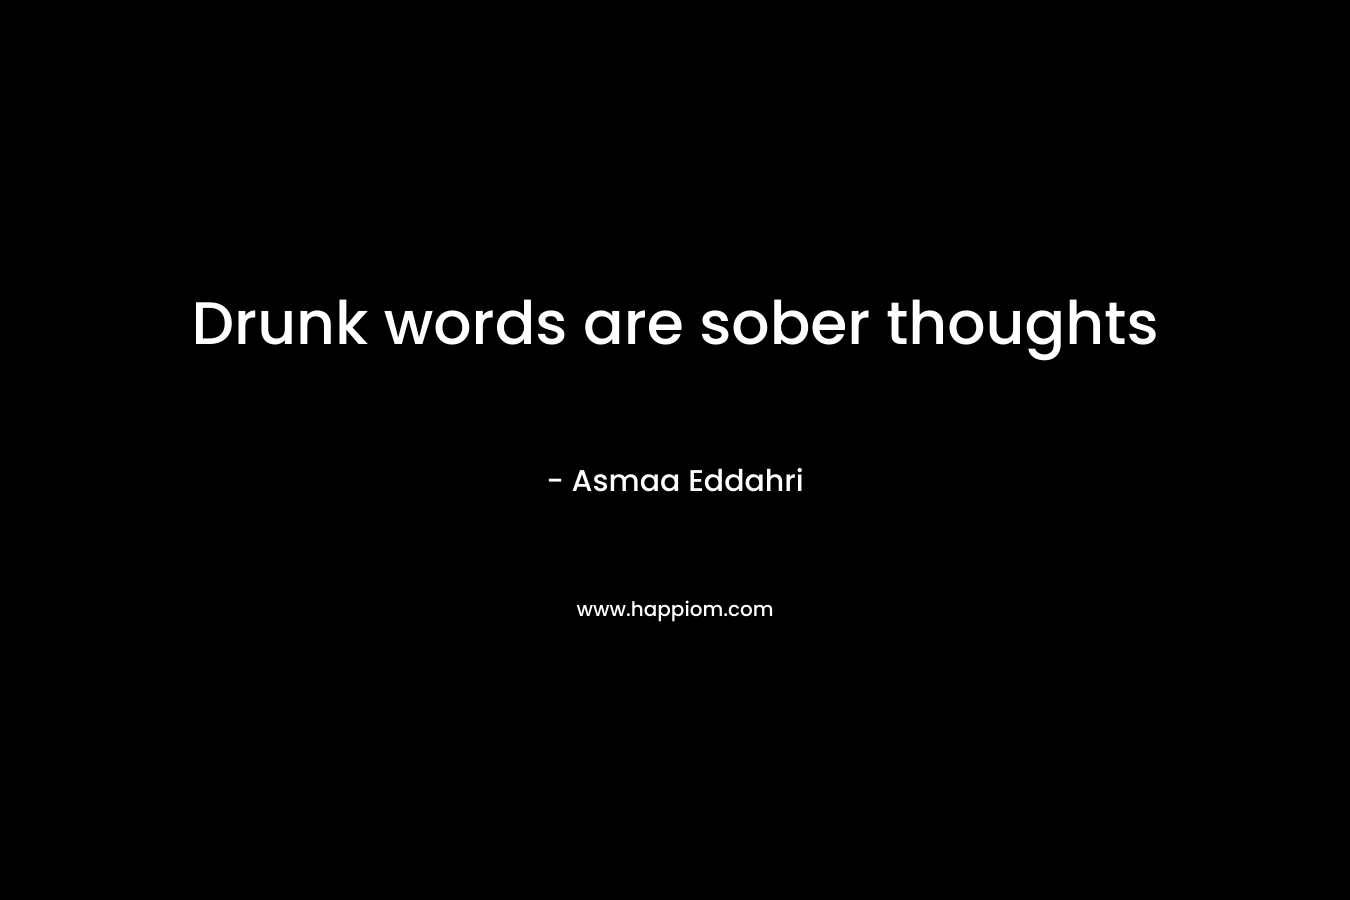 Drunk words are sober thoughts